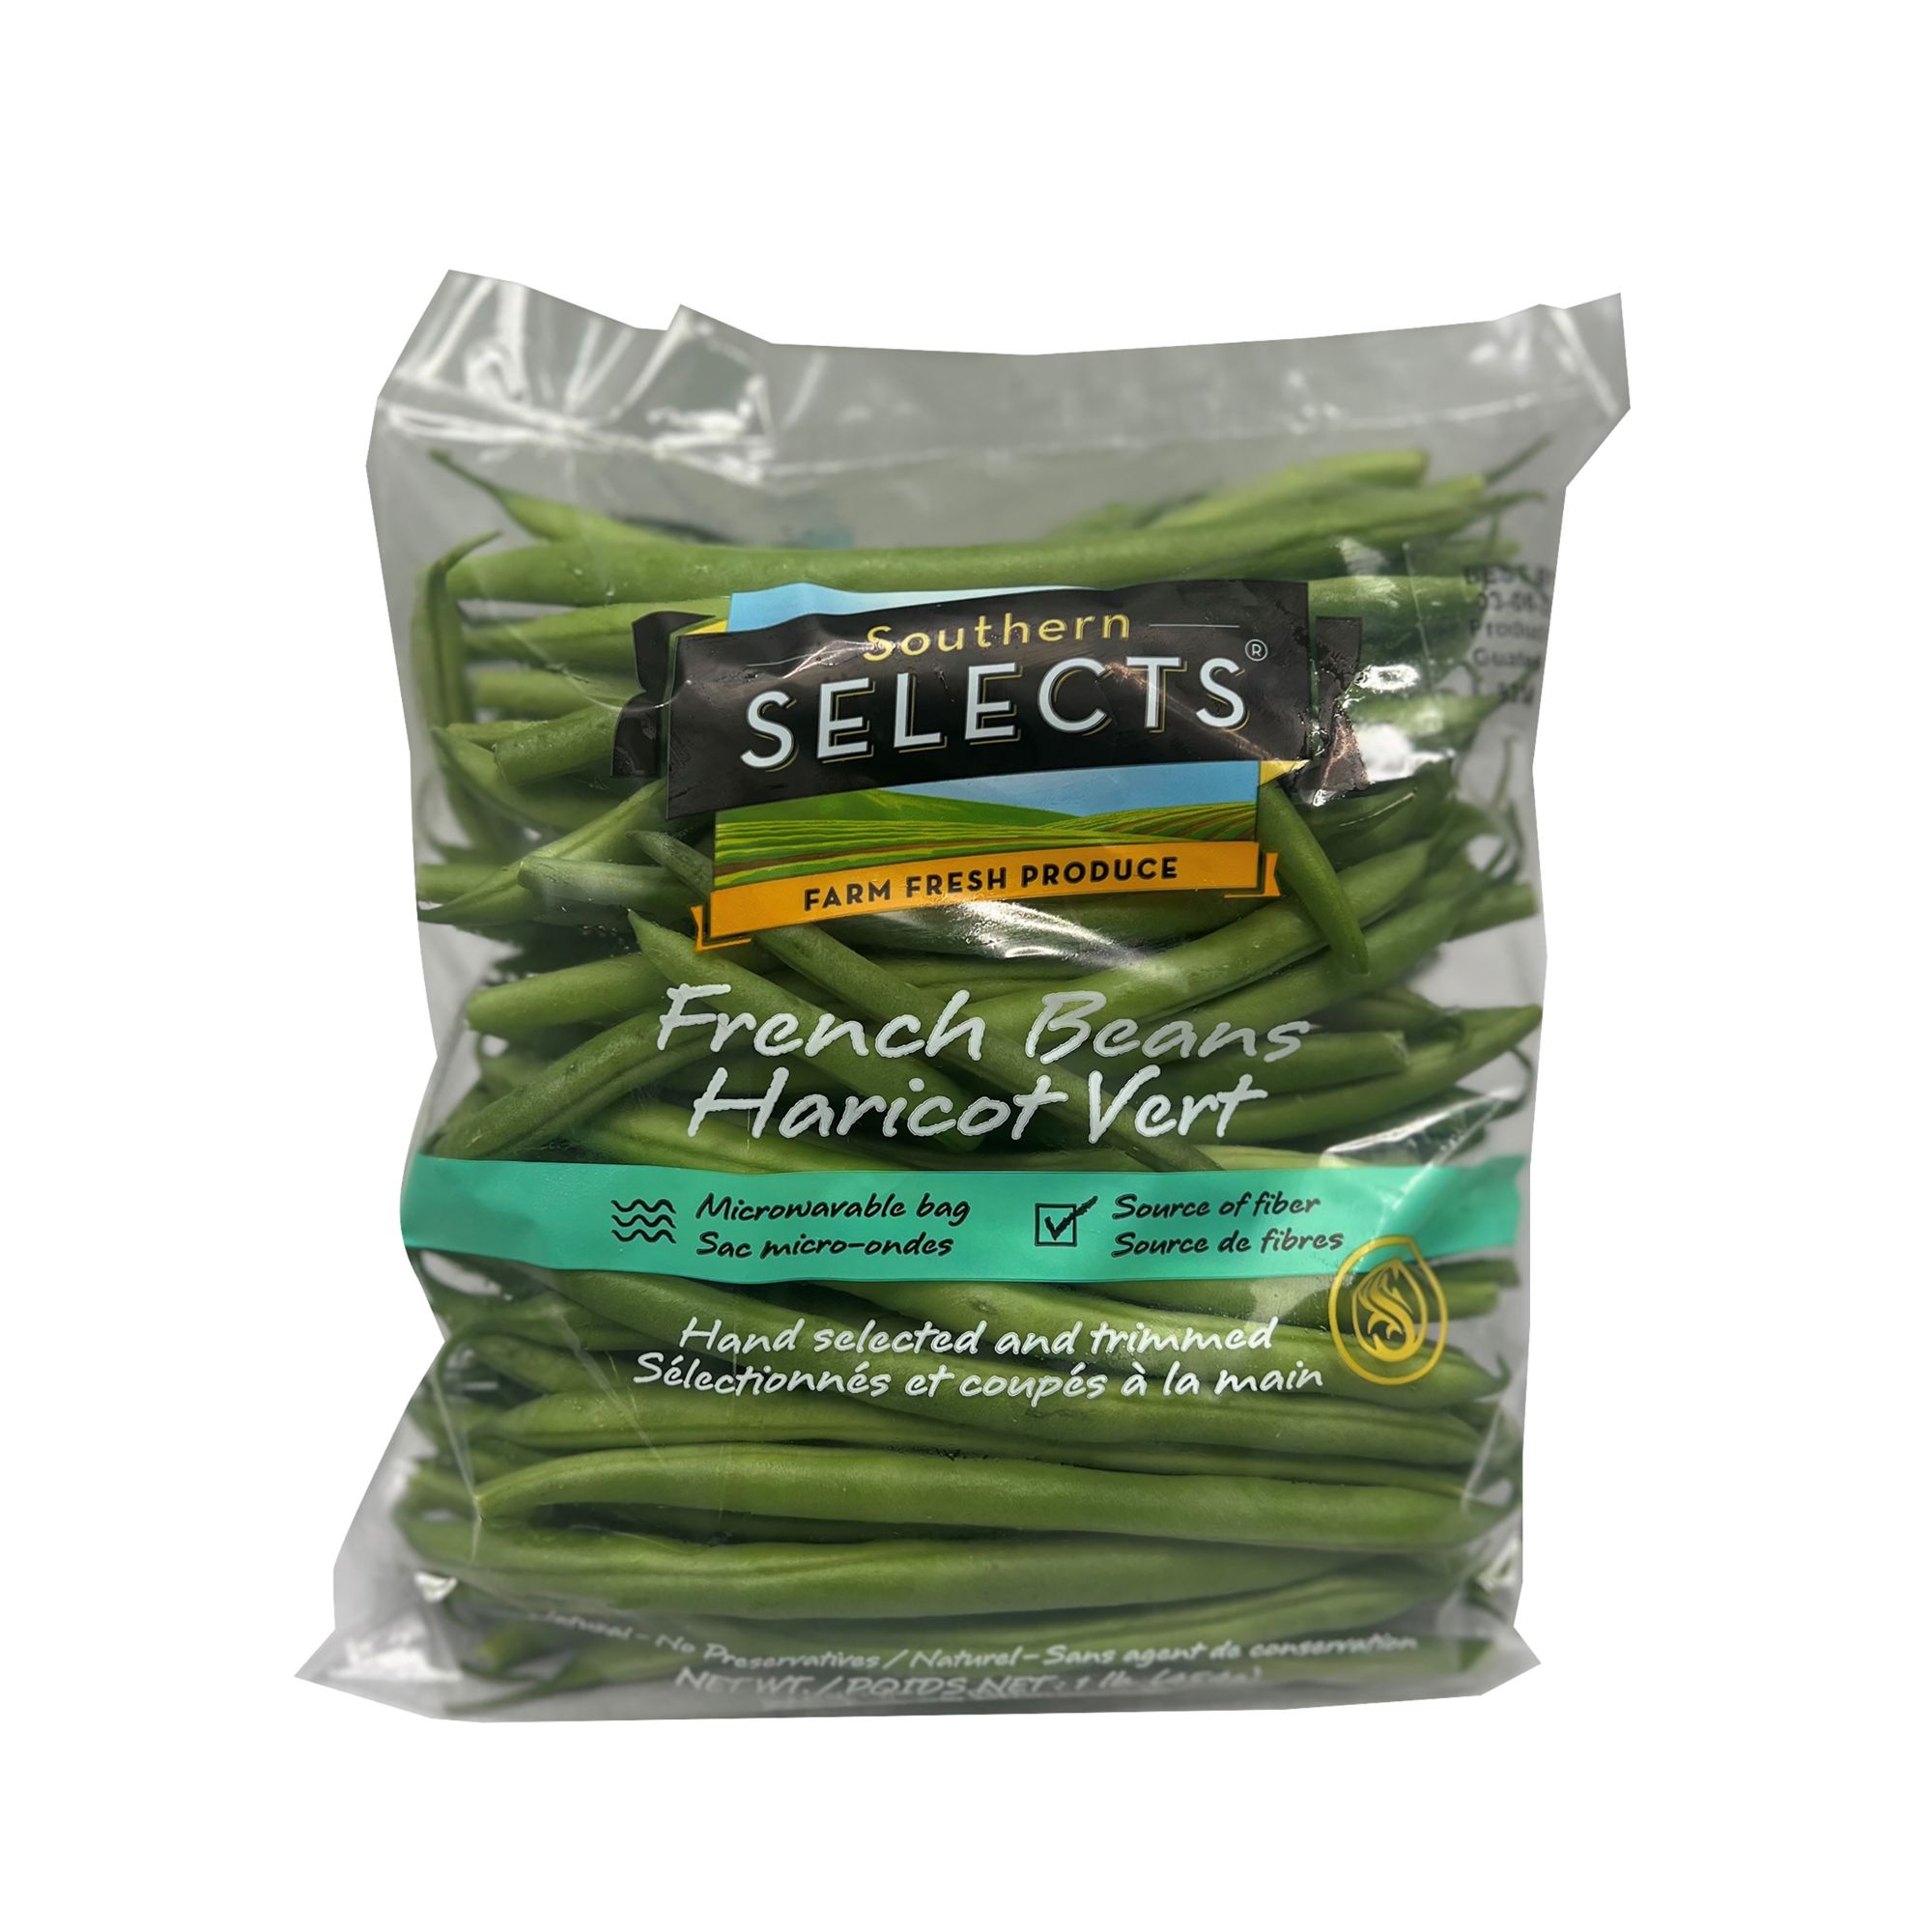 Southern Selects French Beans, 16 oz.